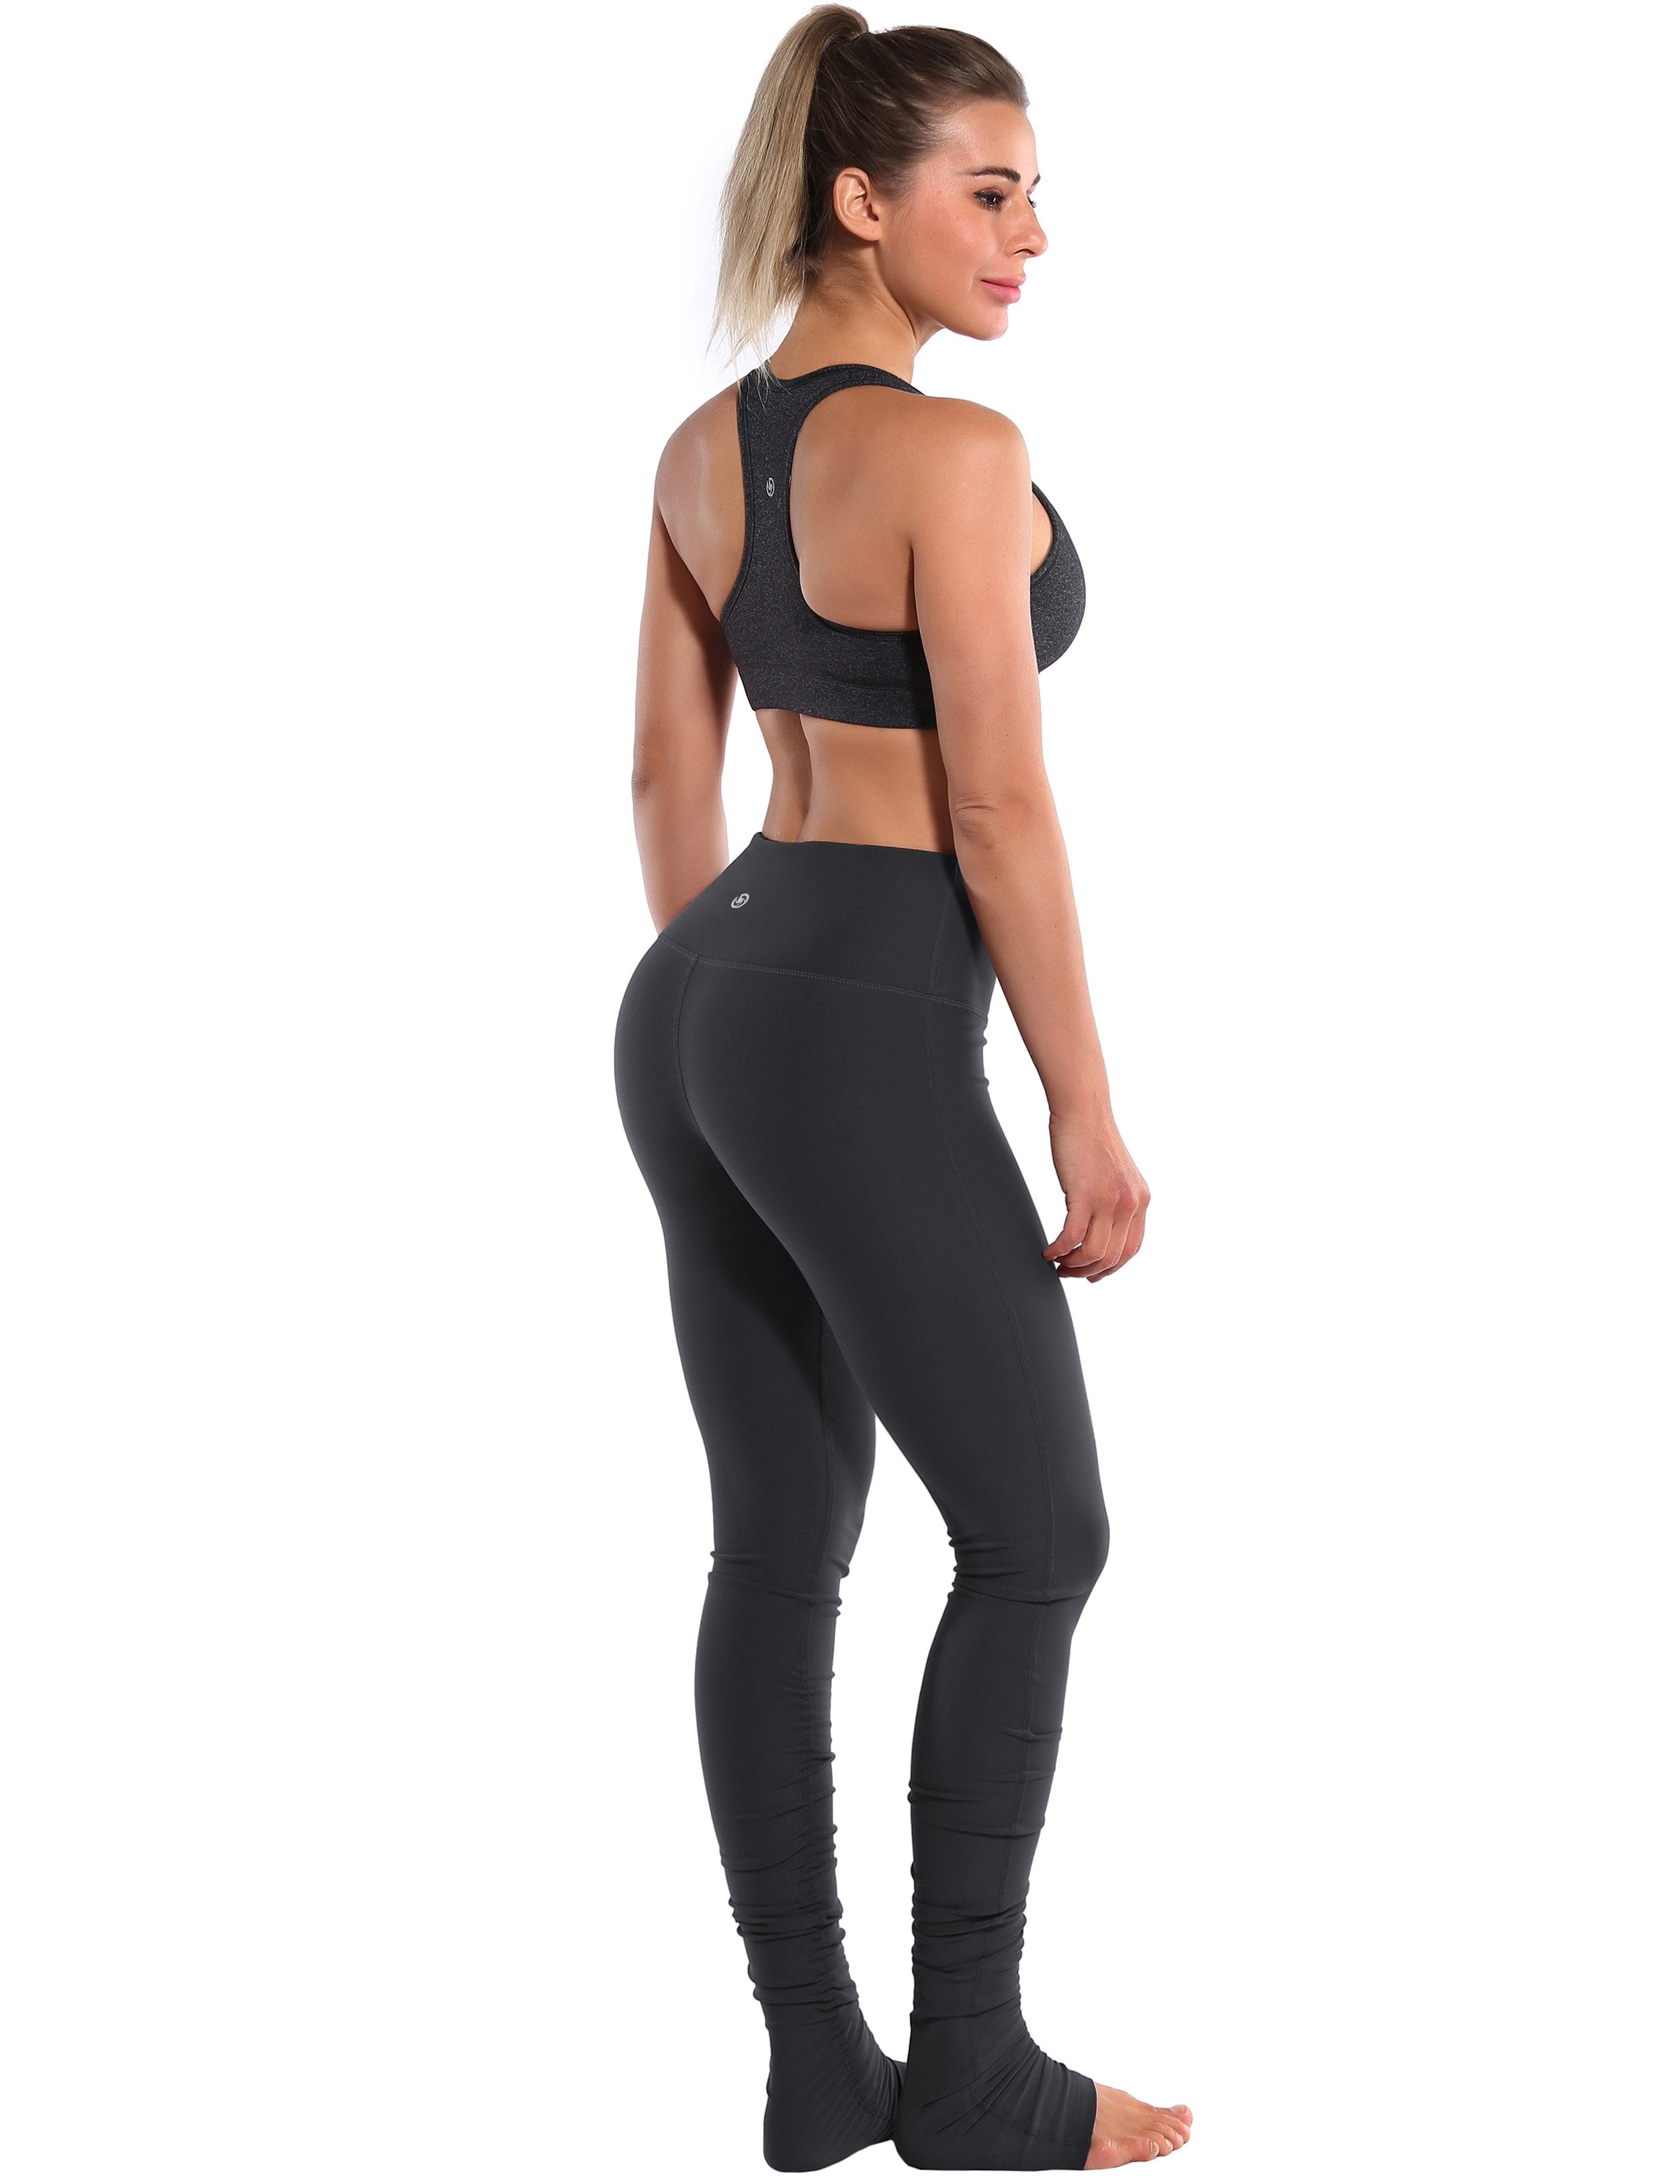 Over the Heel Jogging Pants shadowcharcoal Over the Heel Design 87%Nylon/13%Spandex Fabric doesn't attract lint easily 4-way stretch No see-through Moisture-wicking Tummy control